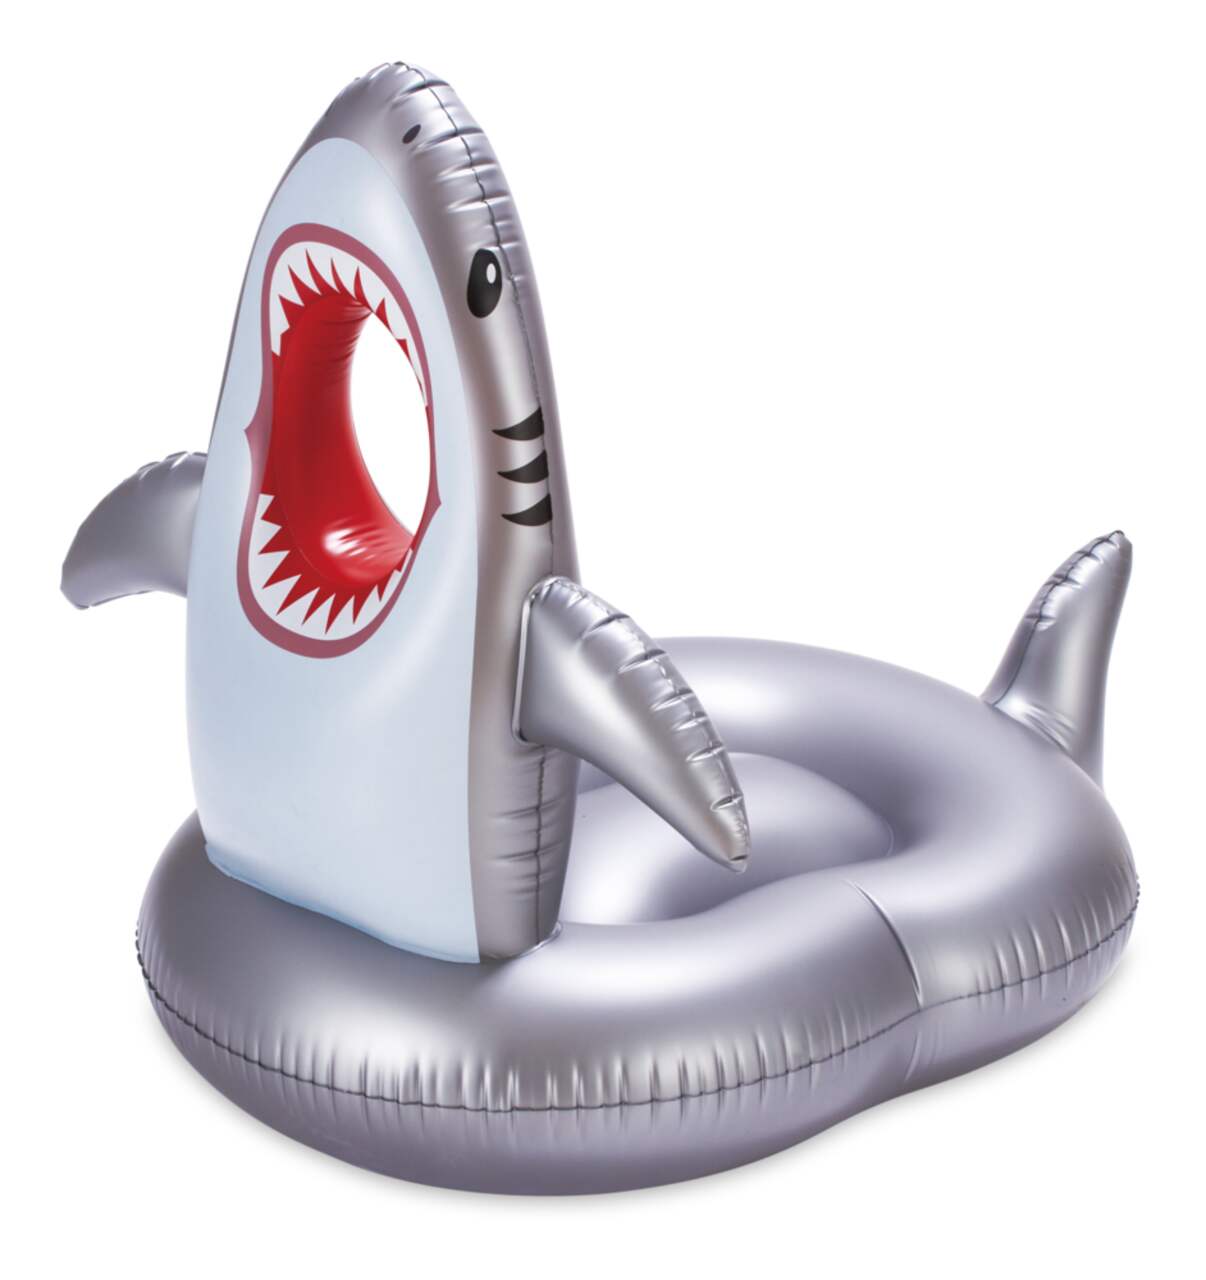 Stella & Finn Inflatable Ride-On Shark Pool Float/Lounger, Grey, 60-in